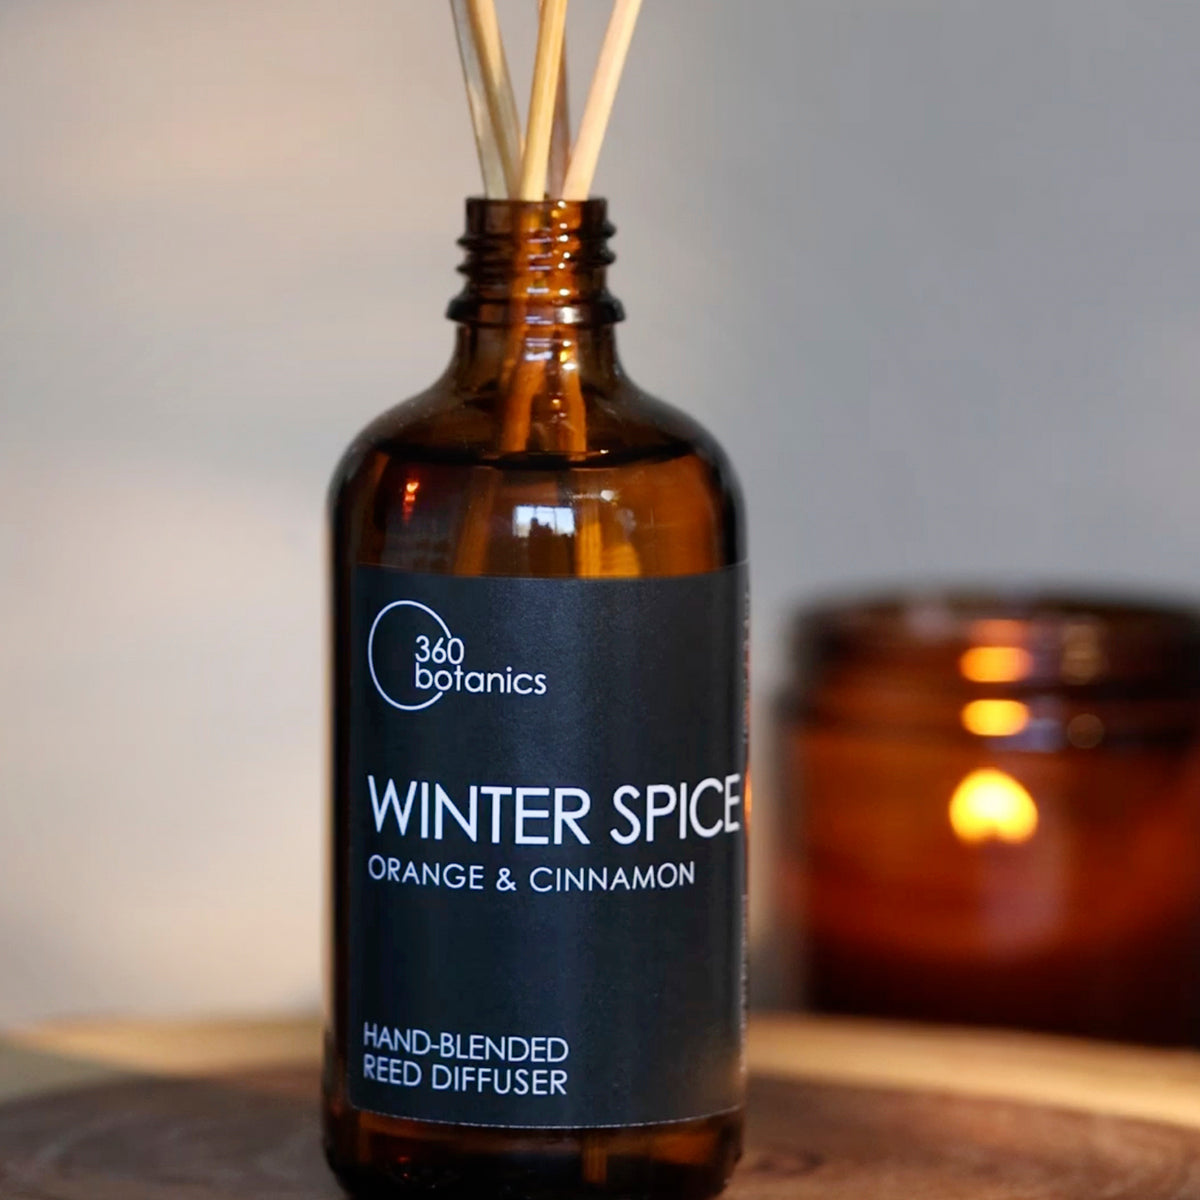 The 360 Botanics Winter Spice reed diffuser, featuring a blend of orange and cinnamon scents, is showcased in an amber glass bottle with reeds inserted. The warm glow of a candle in the blurred background adds a cosy atmosphere, highlighting the seasonal fragrance of the product